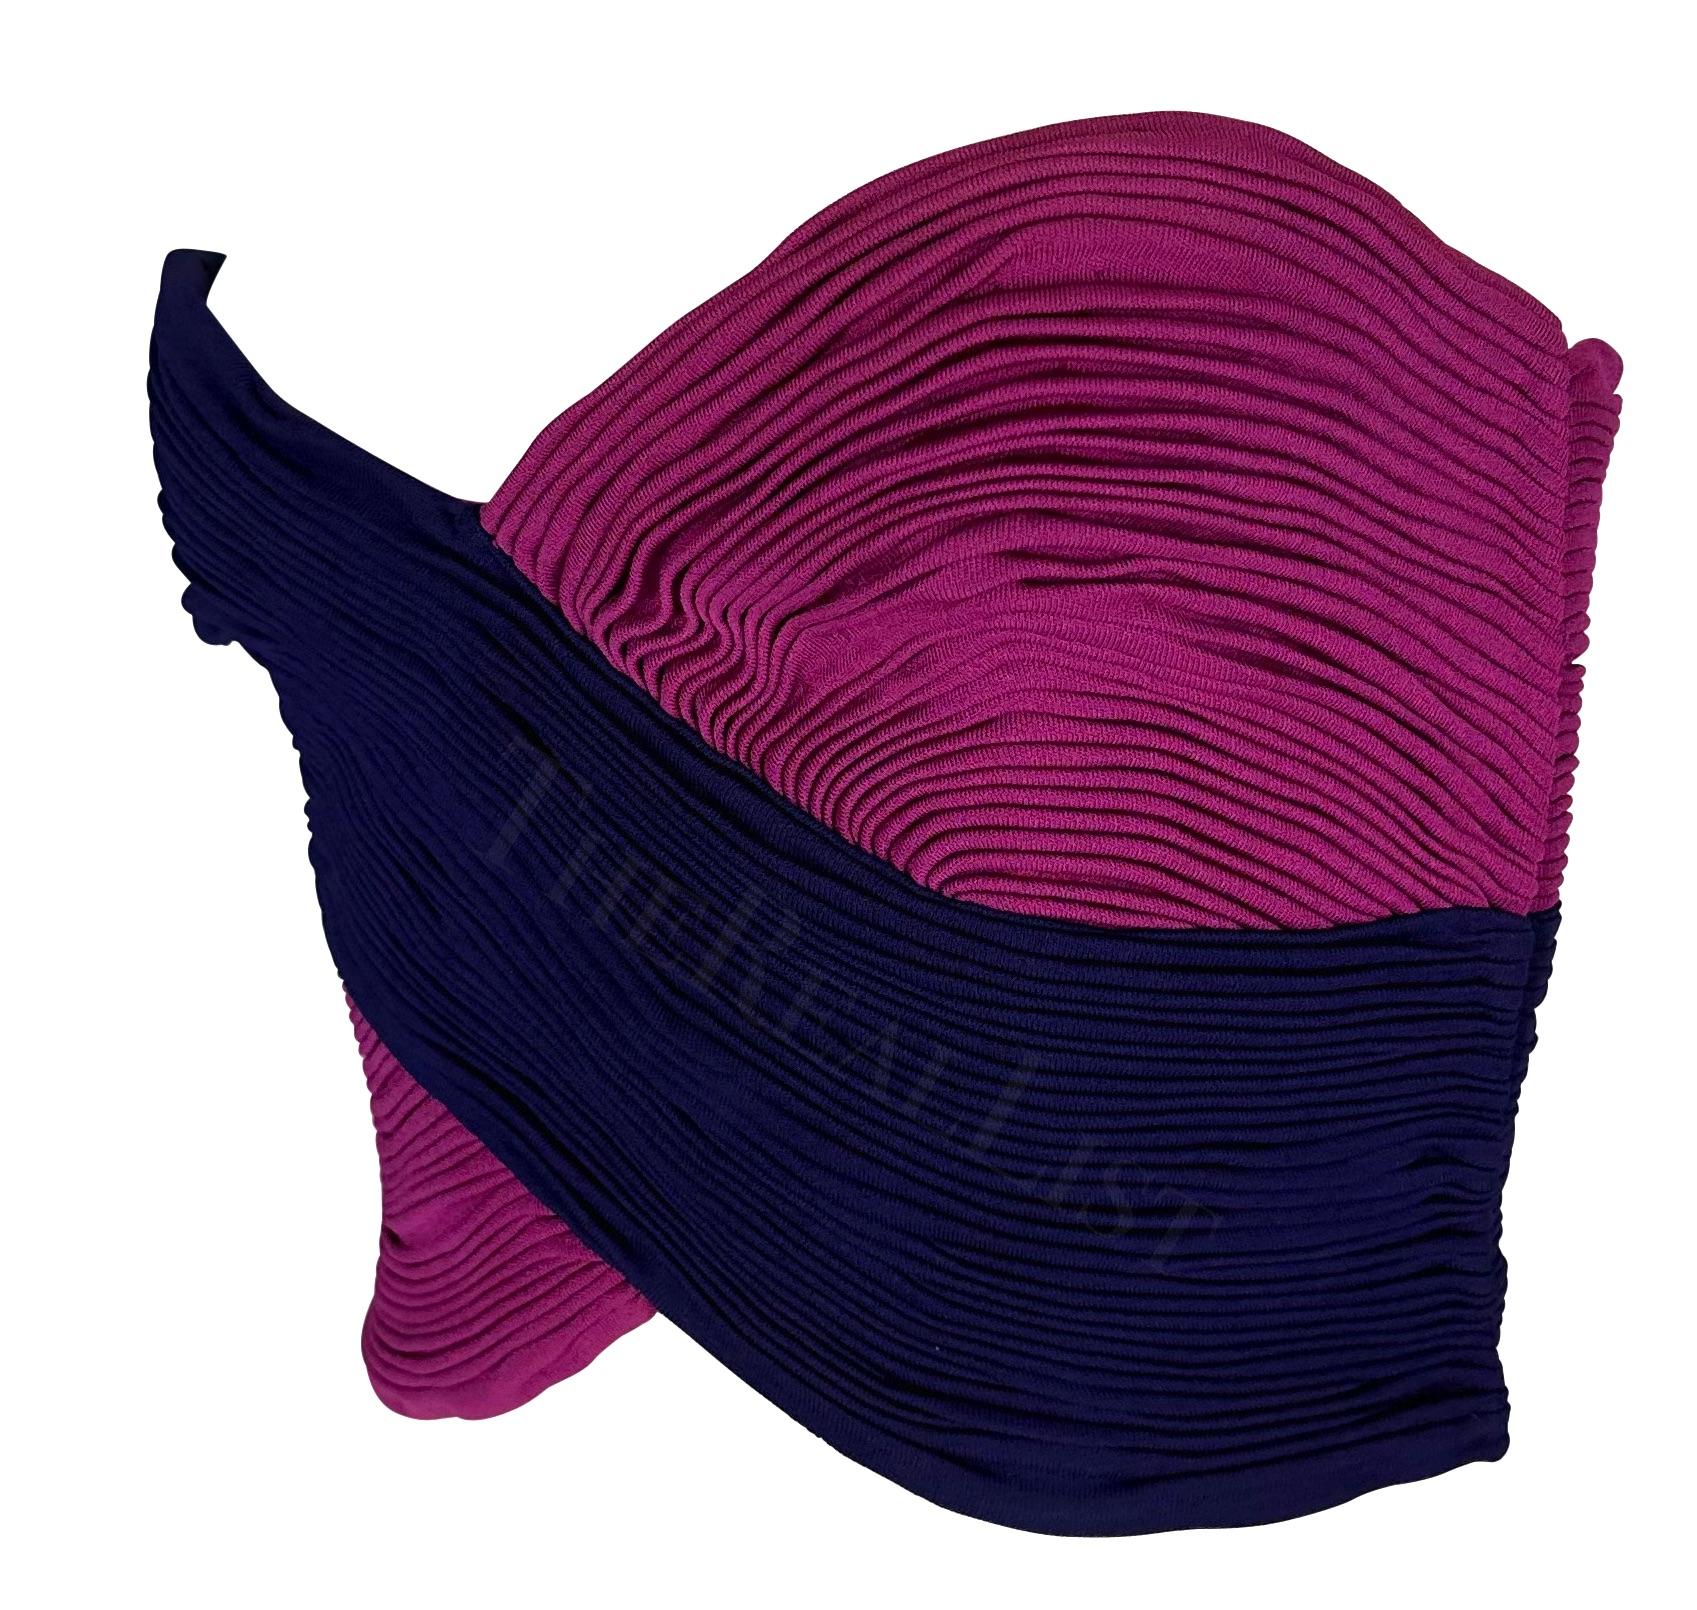 Presenting a fabulous pink and purple Gianni Versace crop top, designed by Gianni Versace. From his Spring/Summer 1990 collection, this strapless top features ruching throughout and gives the illusion of pink and purple fabric being wrapped around